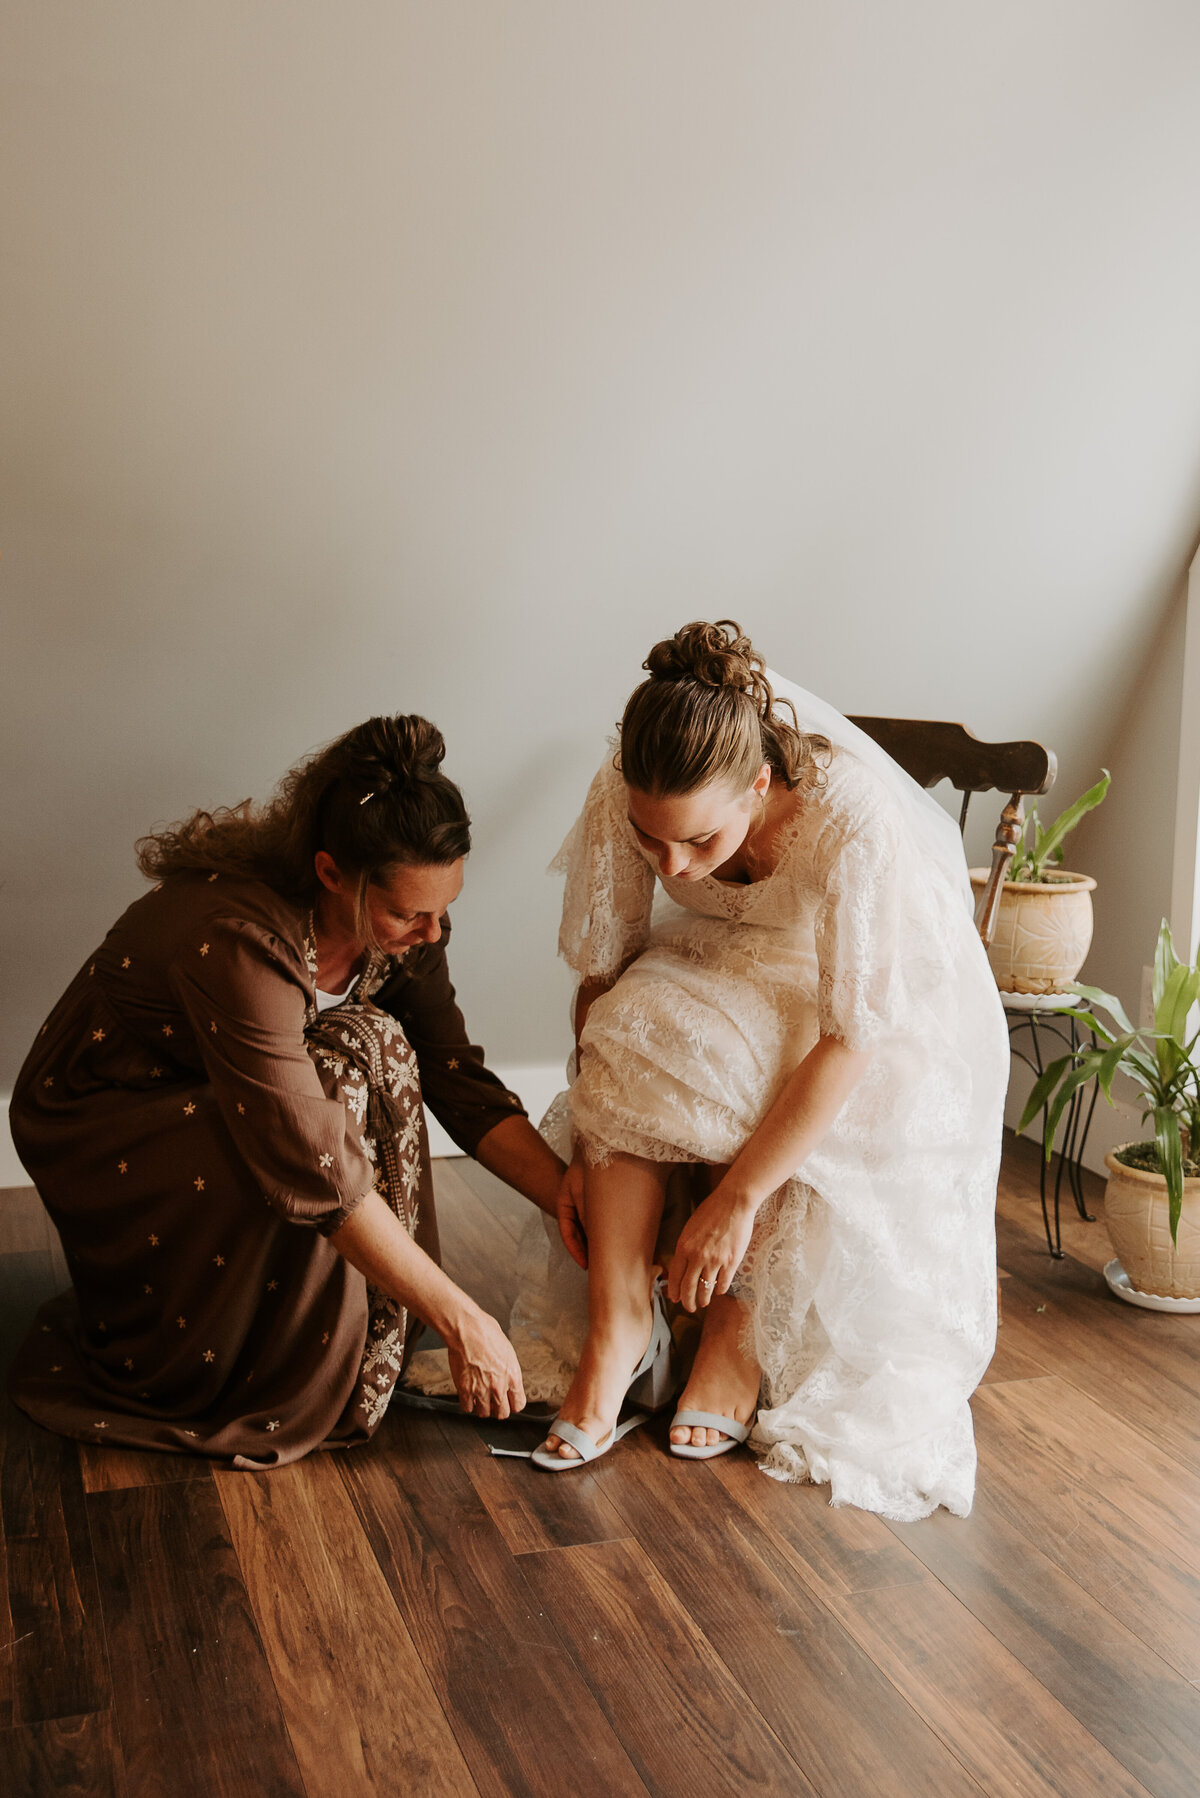 Getting ready photos with bride's mom helping her put on her shoes in an Airbnb outside of Mount Airy, North Carolina.